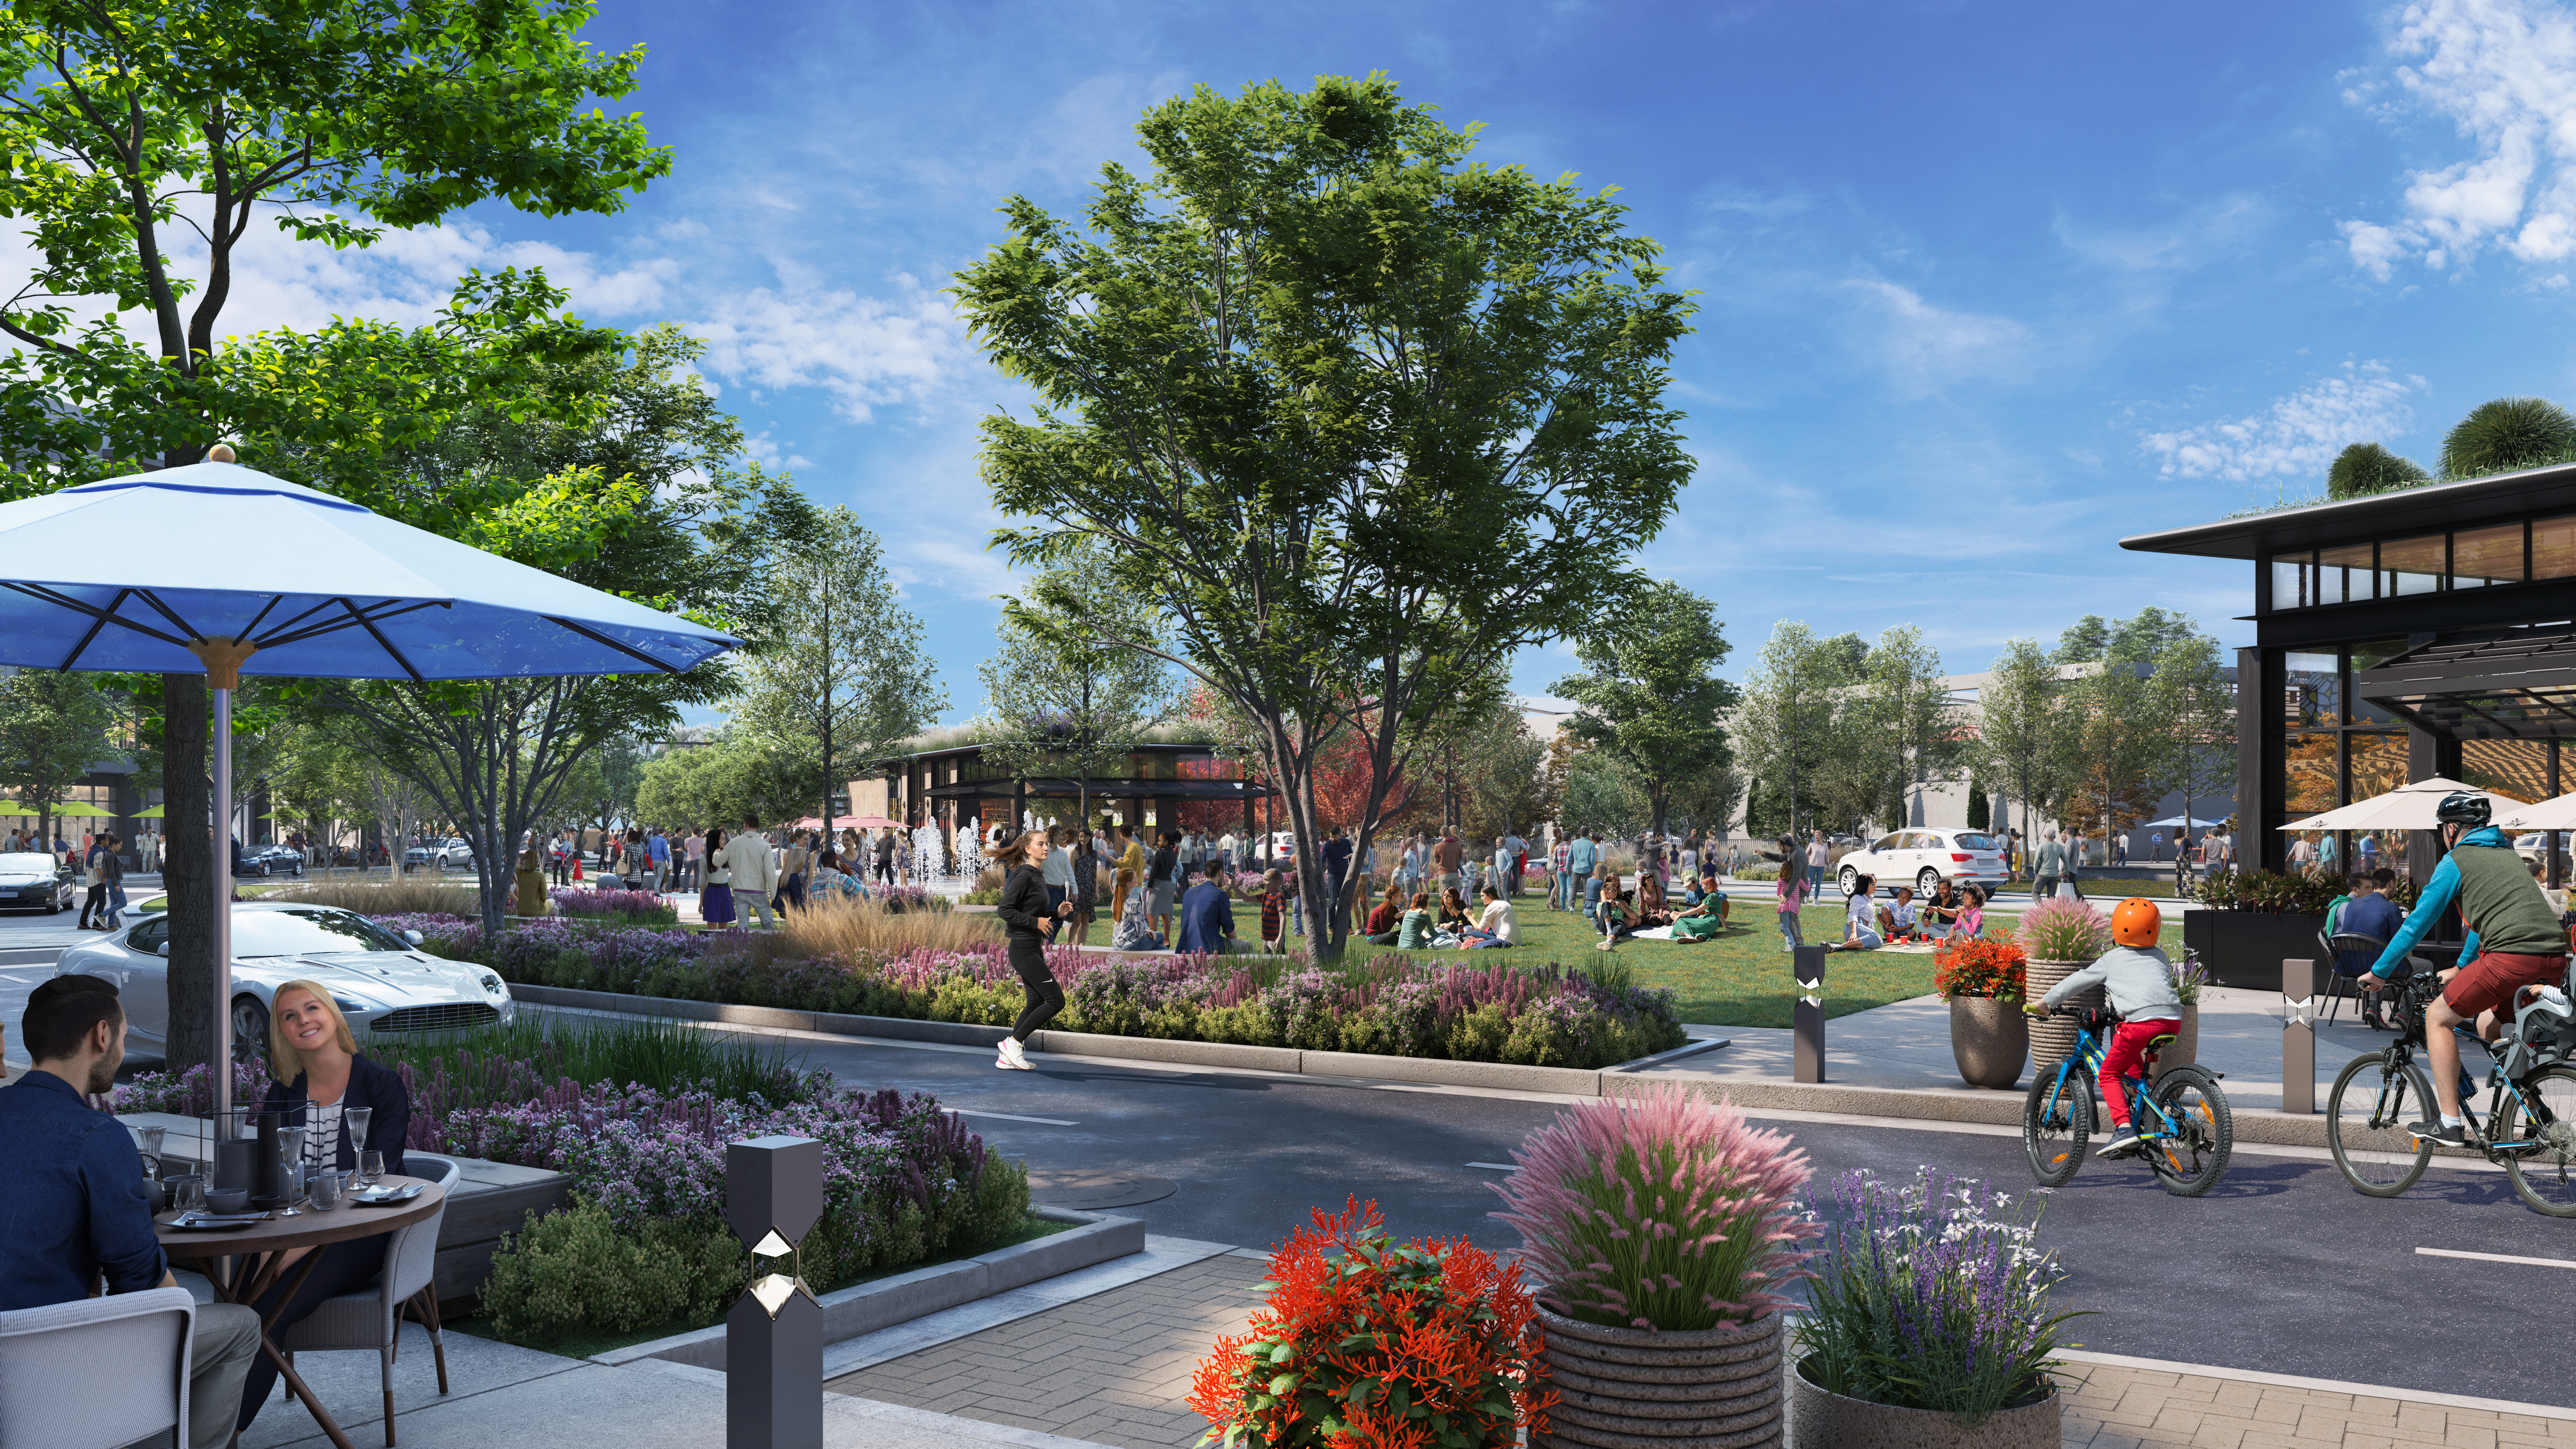 Garden State Plaza's makeover is a sign of changing times